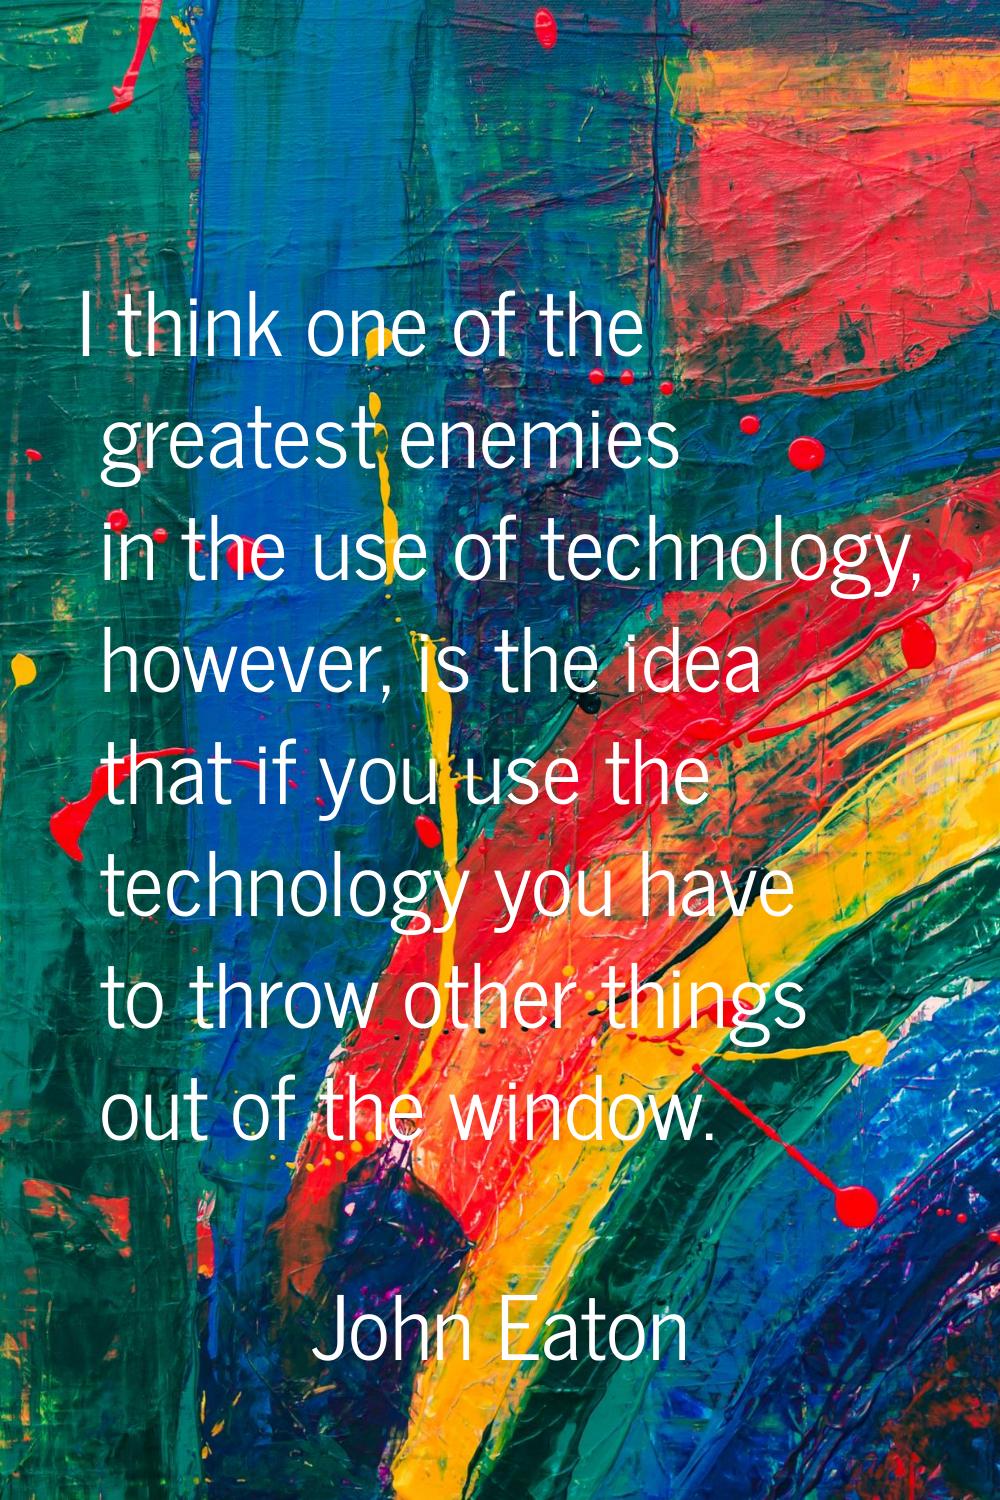 I think one of the greatest enemies in the use of technology, however, is the idea that if you use 